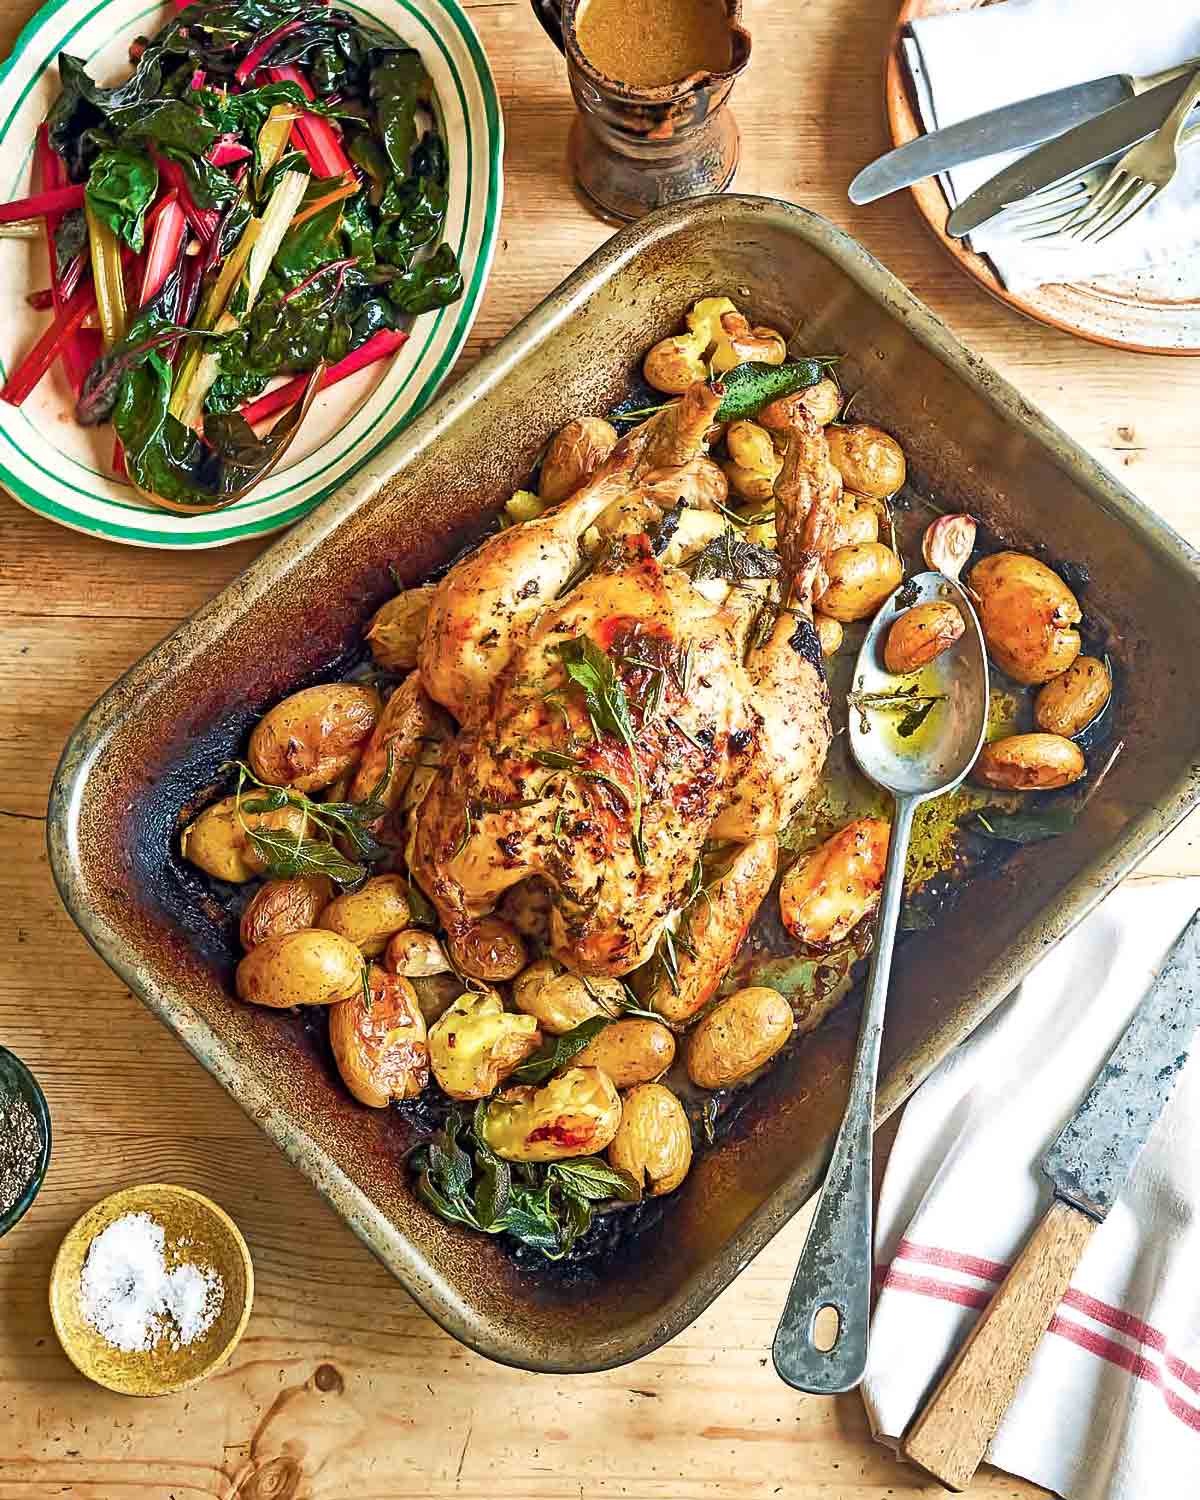 Lemon and herb roast chicken with fingerling potatoes and cloves of garlic, in a roasting pan, beside a plate of Swiss chard salad.